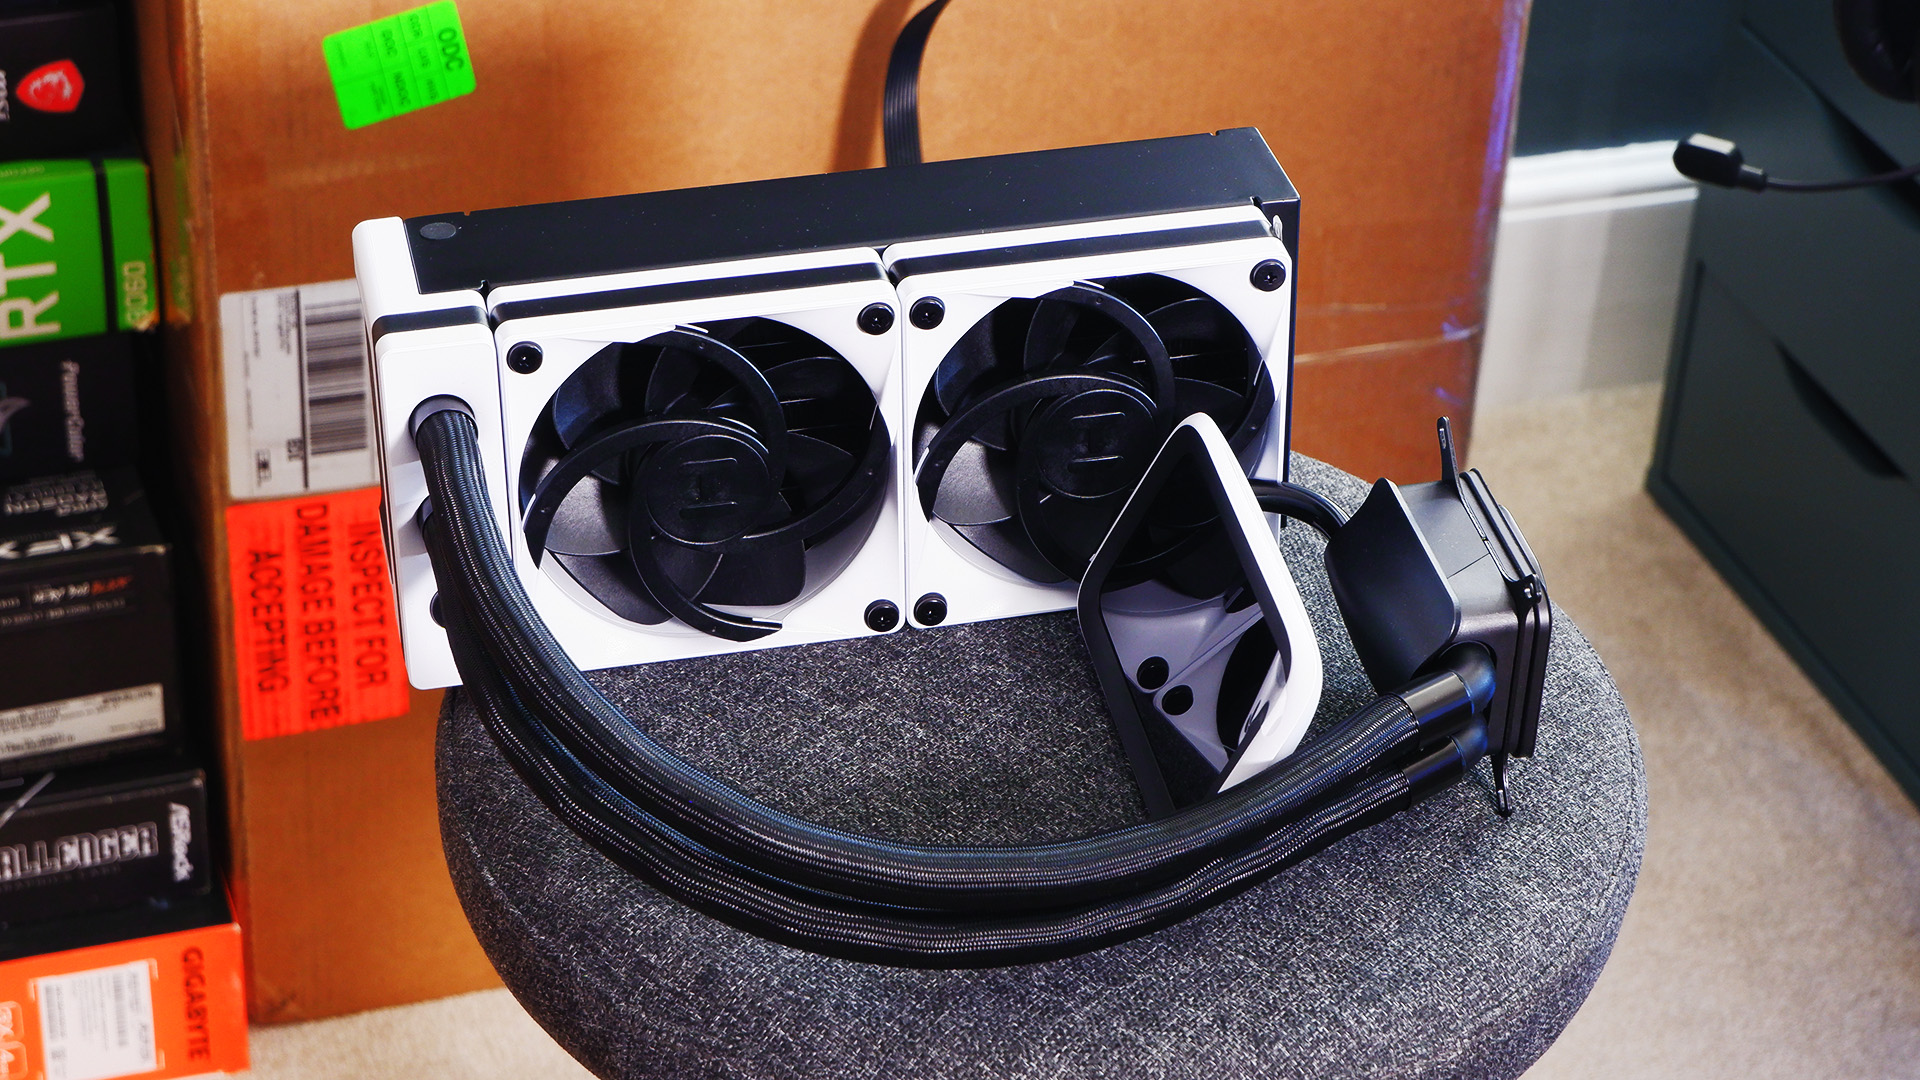 Hyte's Thicc Q60 liquid cooler with a huge 5-inch screen on the cold plate.